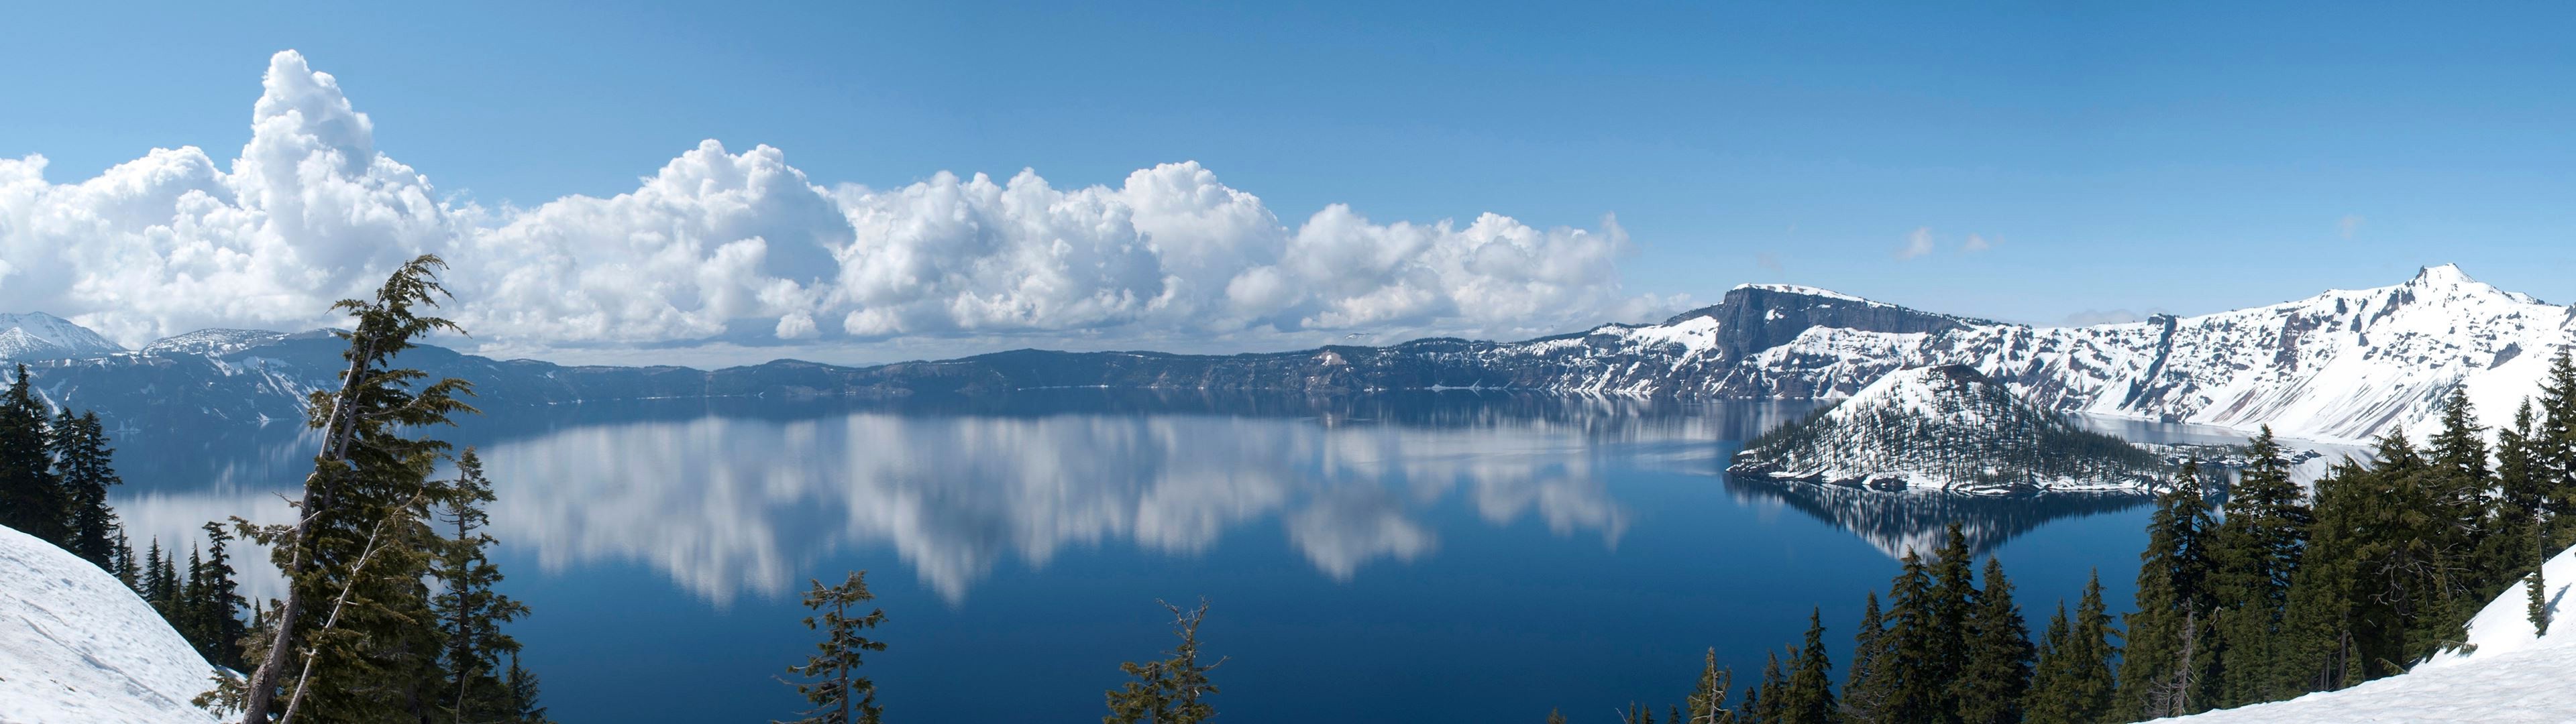 landscape, Lake, Crater Lake, Clouds, Reflection, Multiple Display, Snow Wallpaper